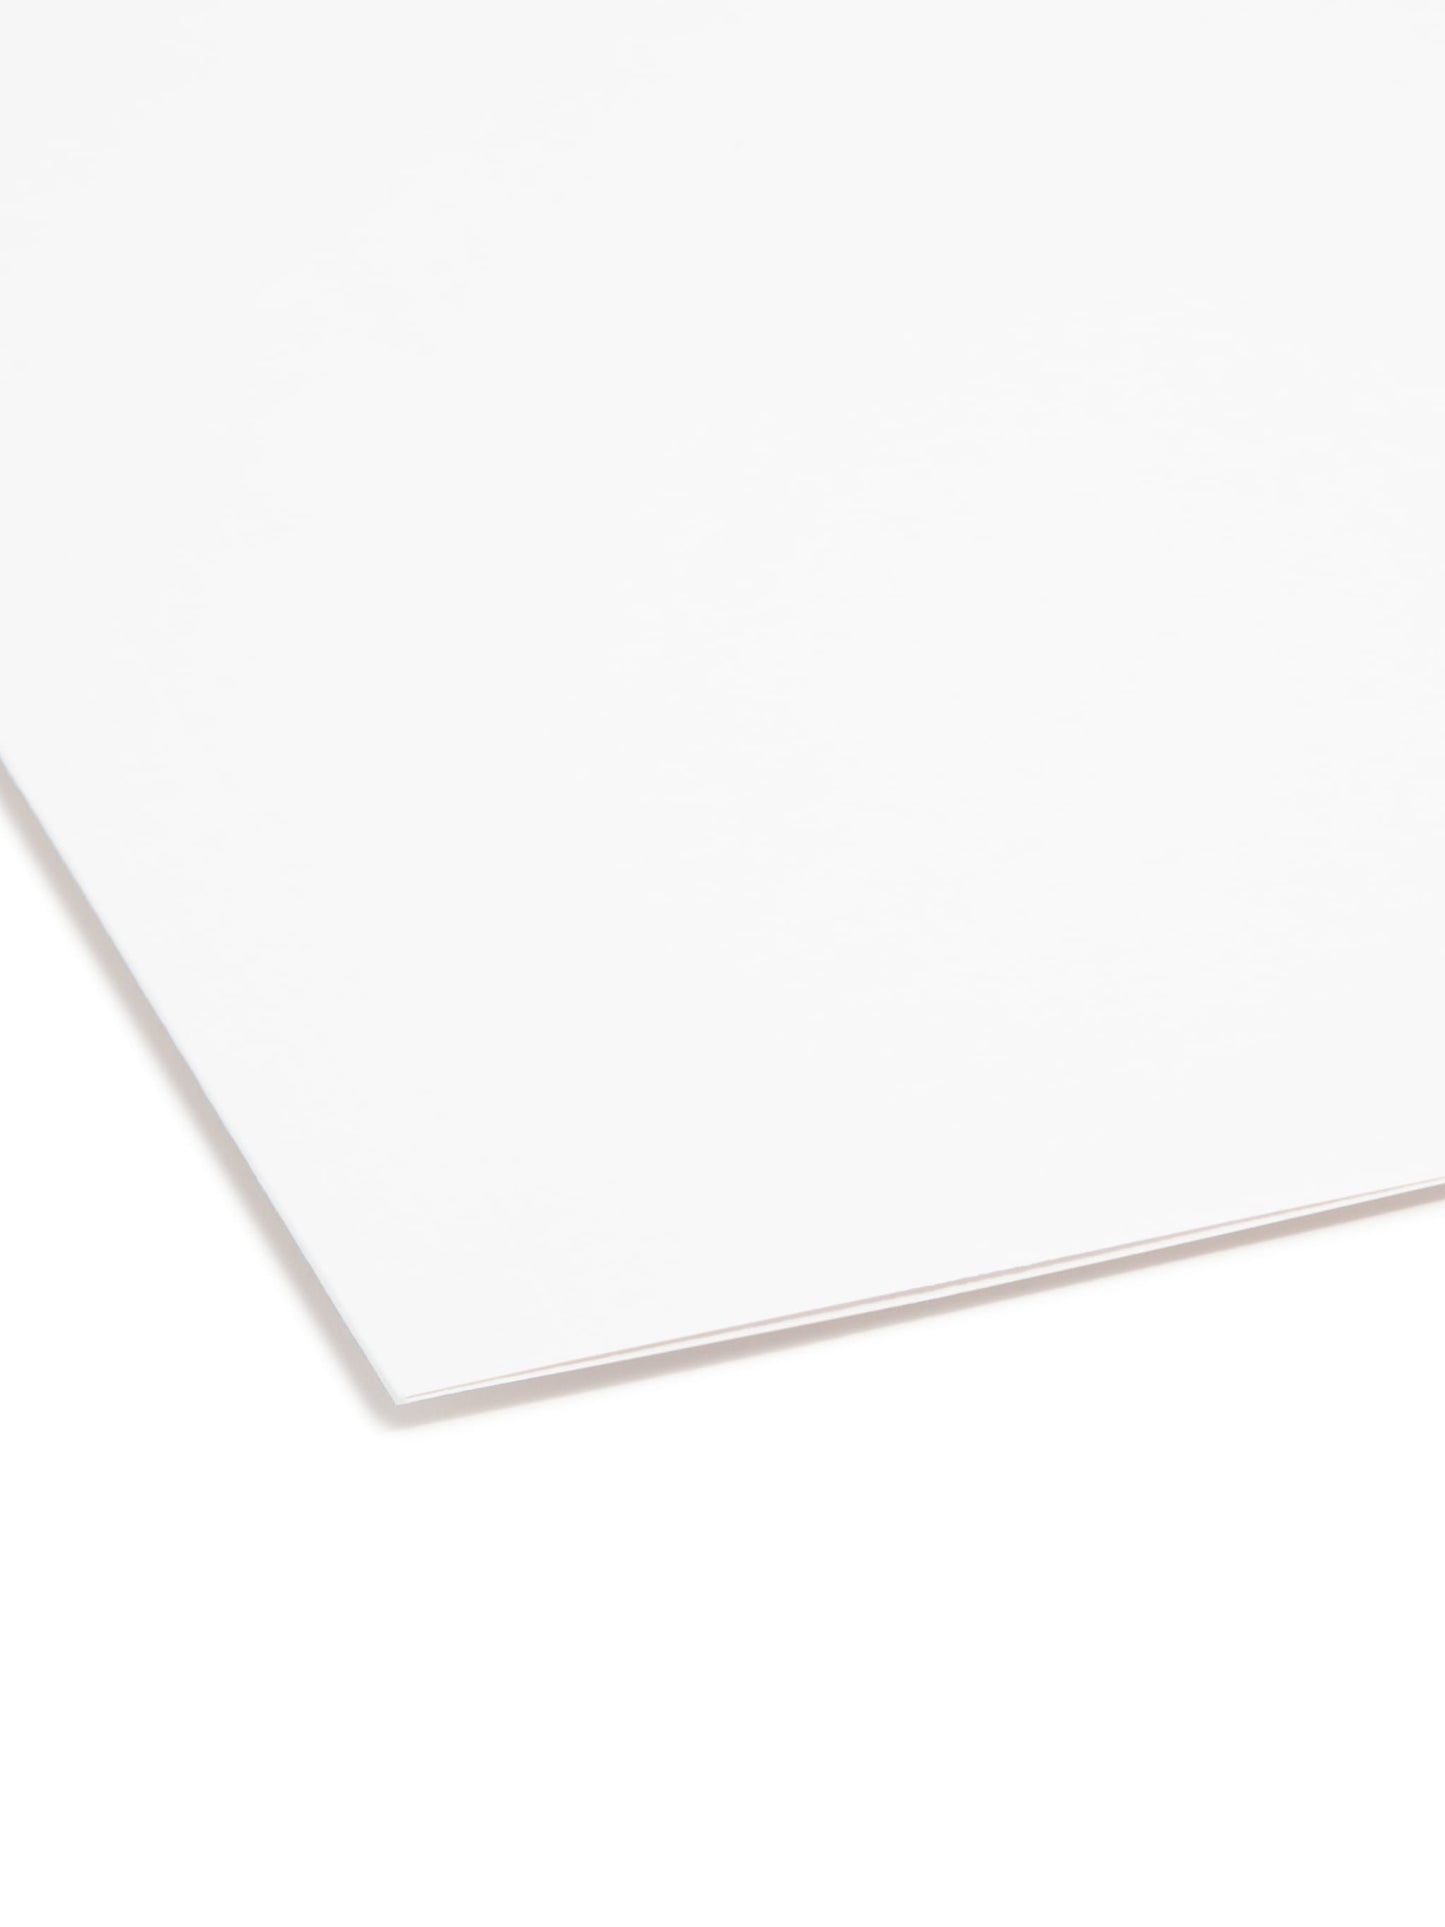 Reinforced Tab Fastener File Folders, 1/3-Cut Tab, 2 Fasteners, White Color, Letter Size, Set of 50, 086486128407